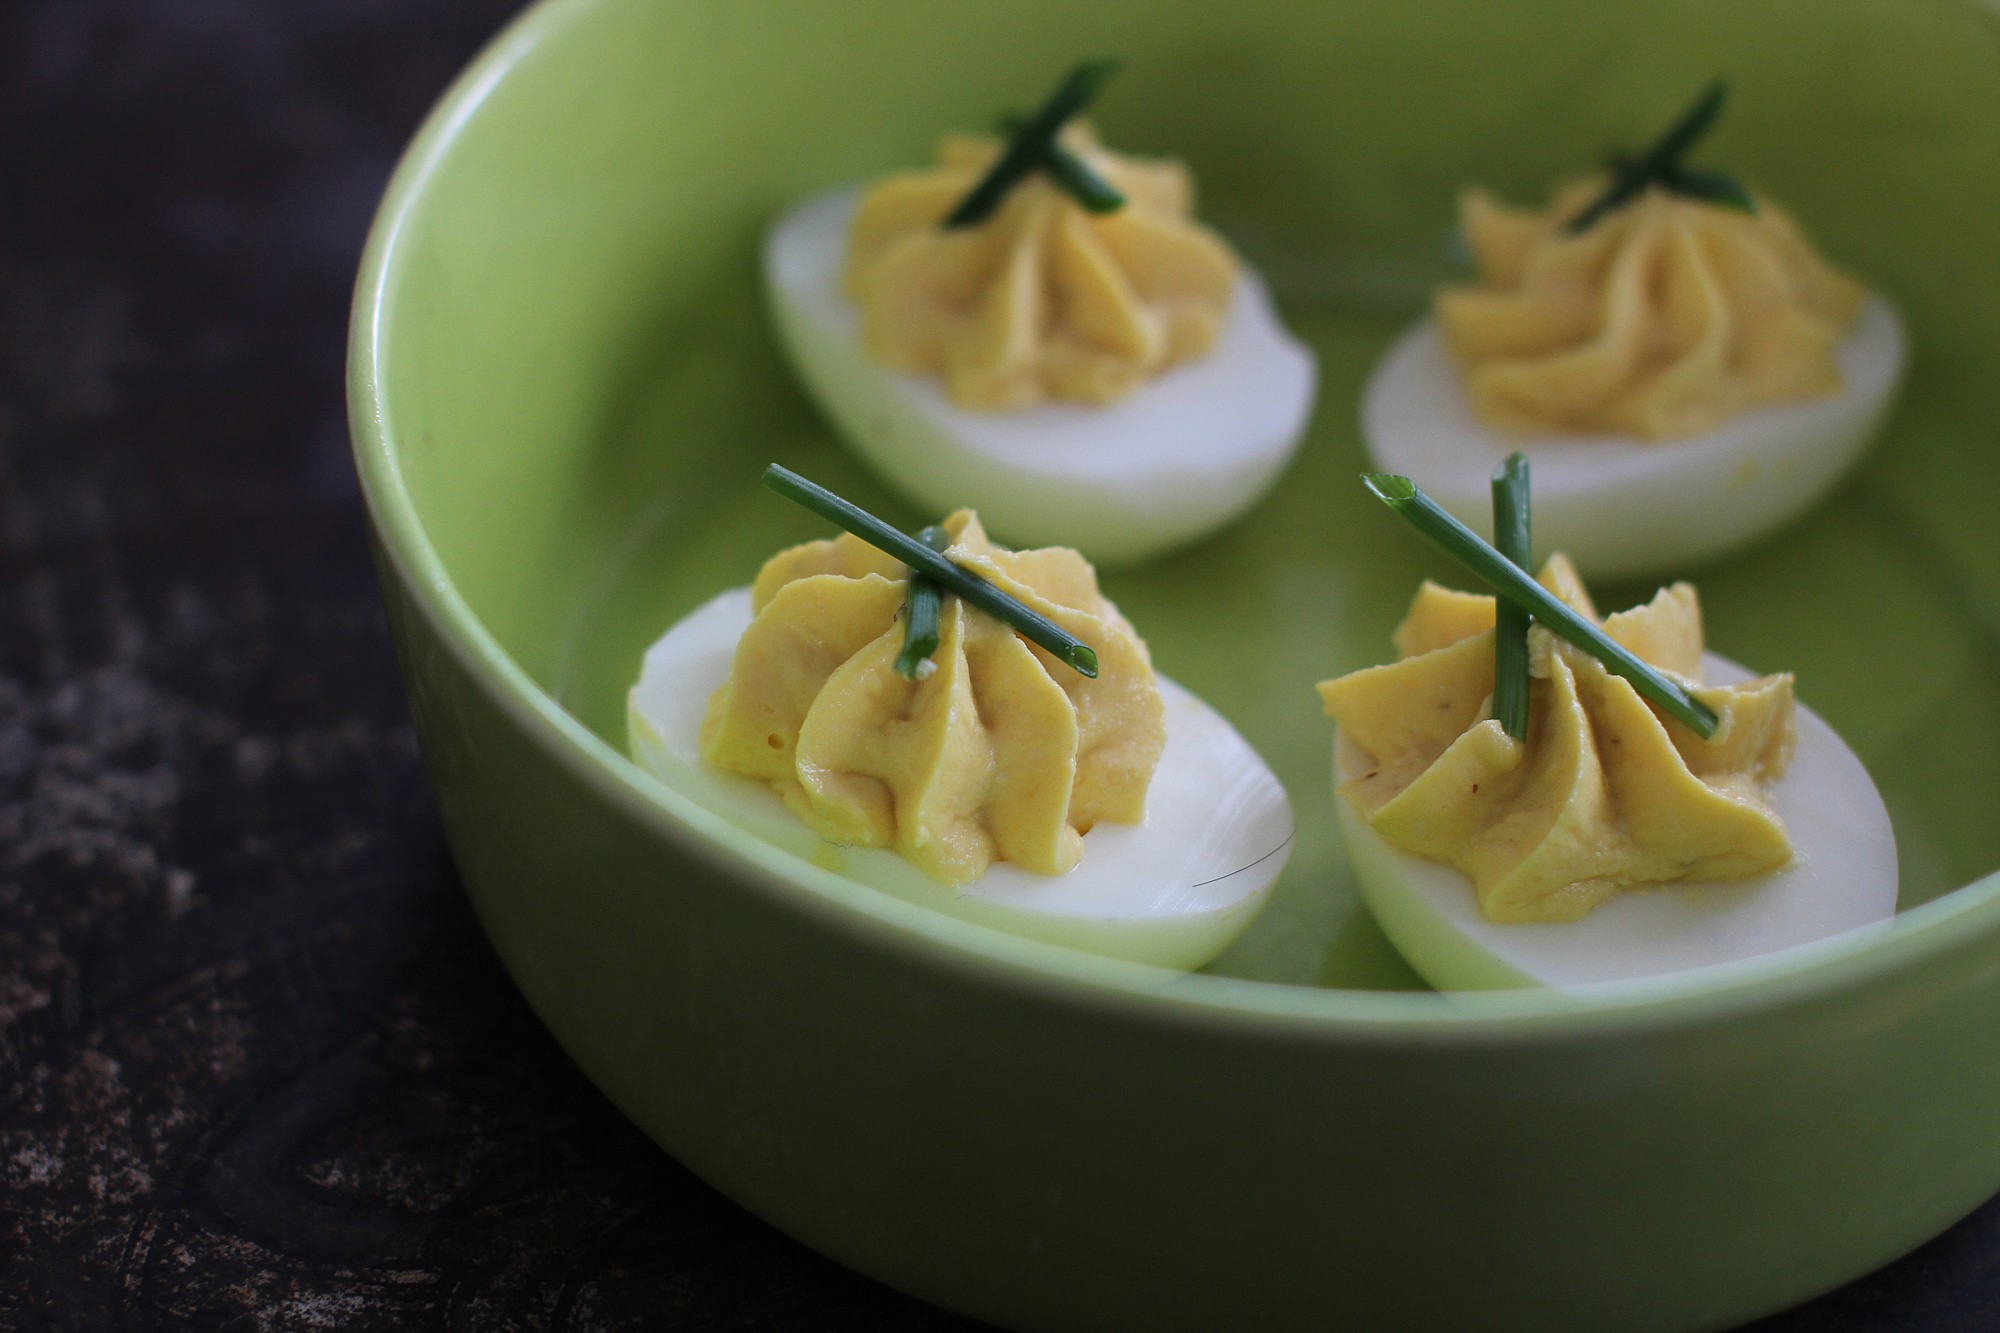 Dress up deviled eggs for an Oscar night viewing party by boiling the eggs properly and sparkle up the usual filling. And voila!